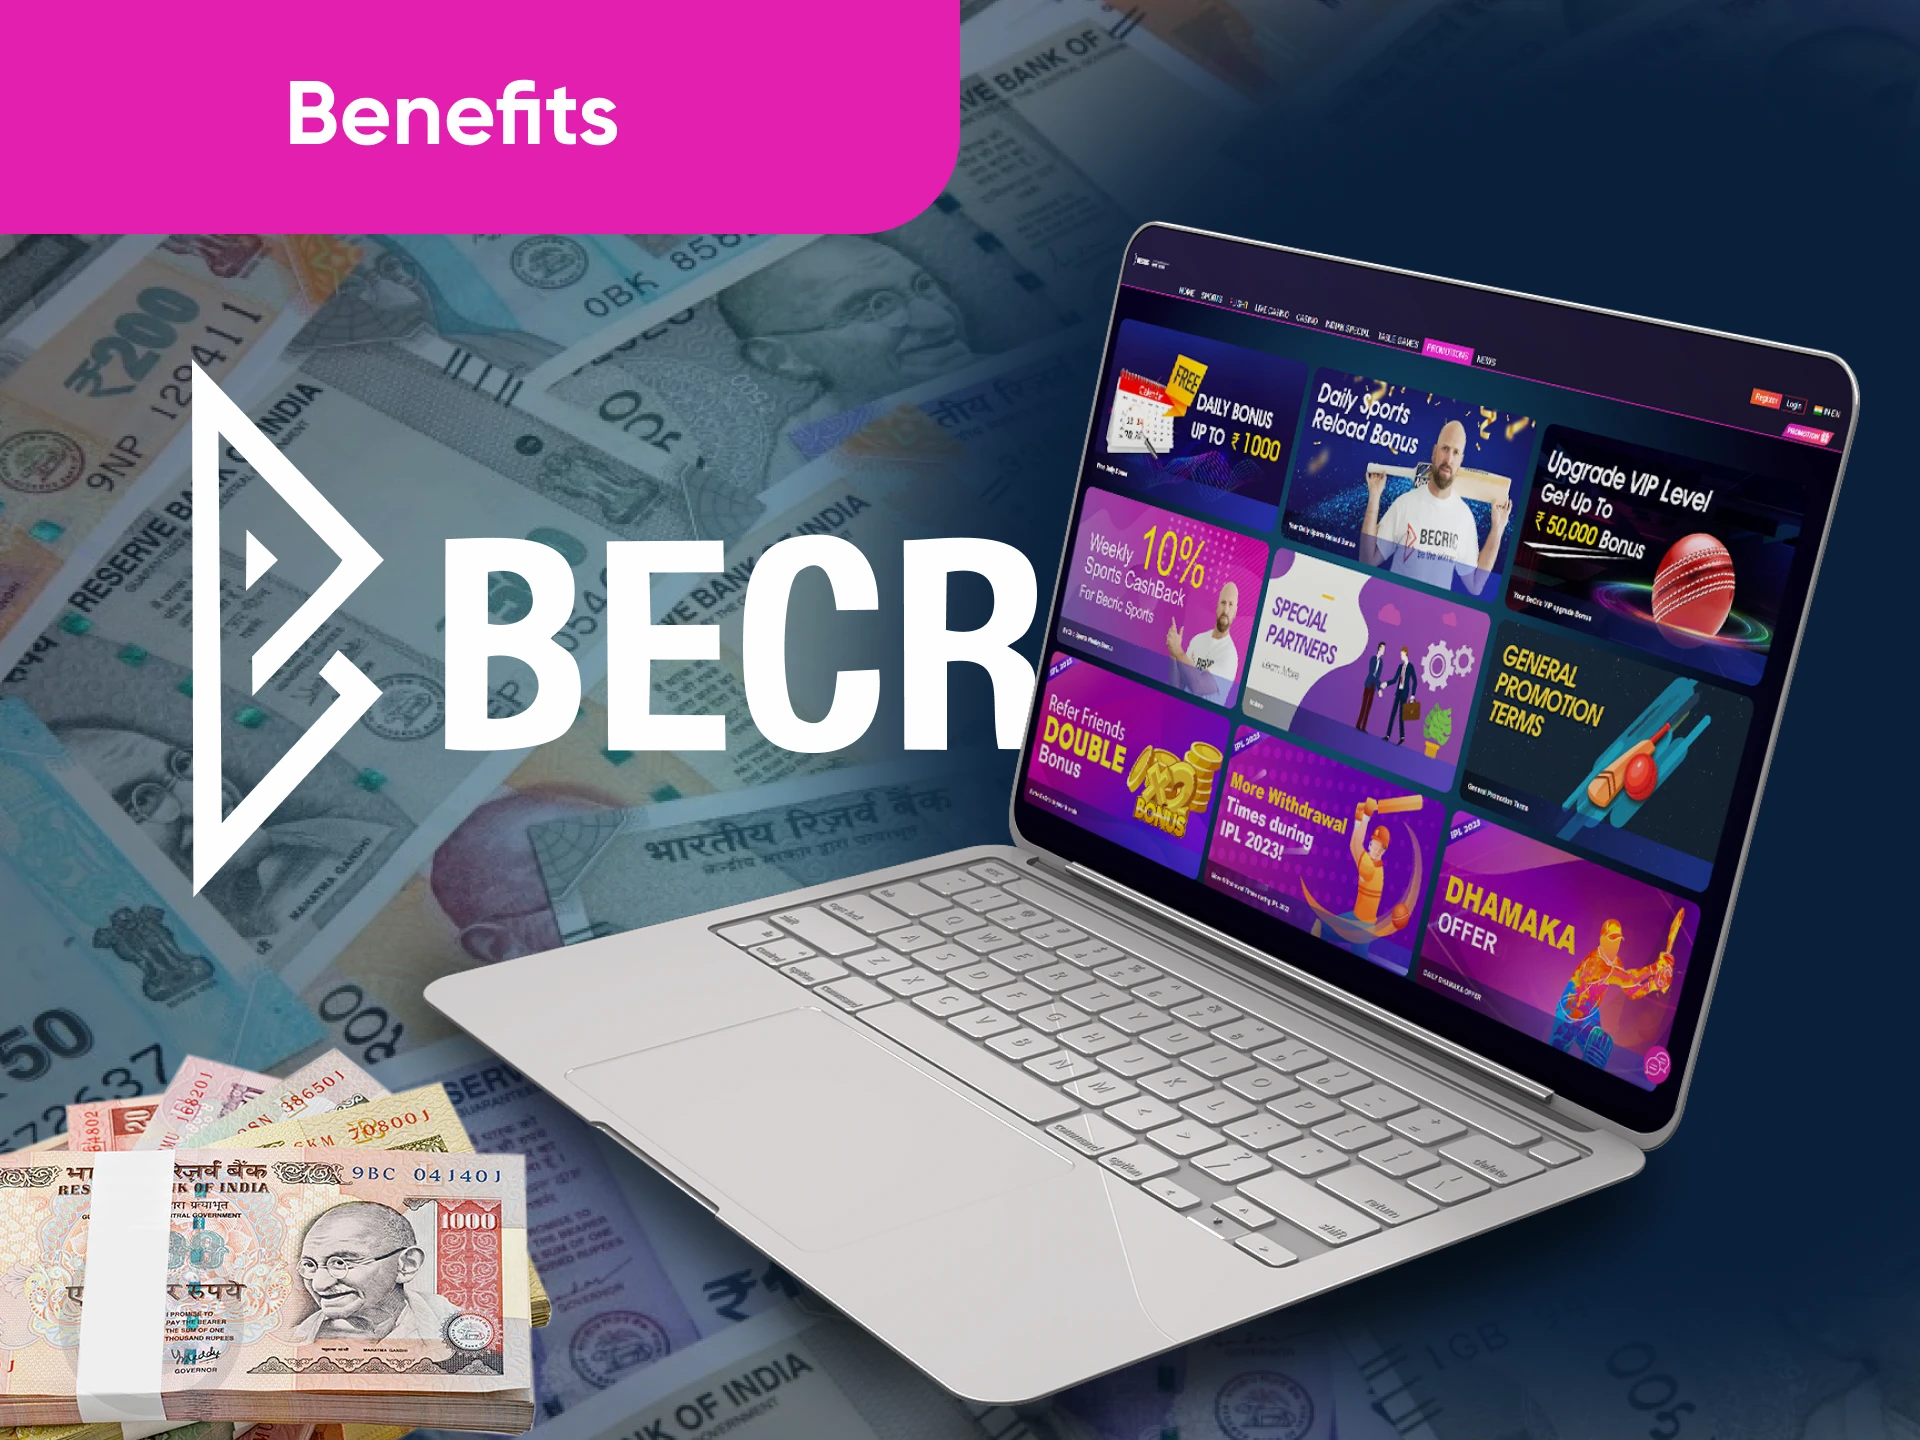 There are many benefits users can find on Becric.